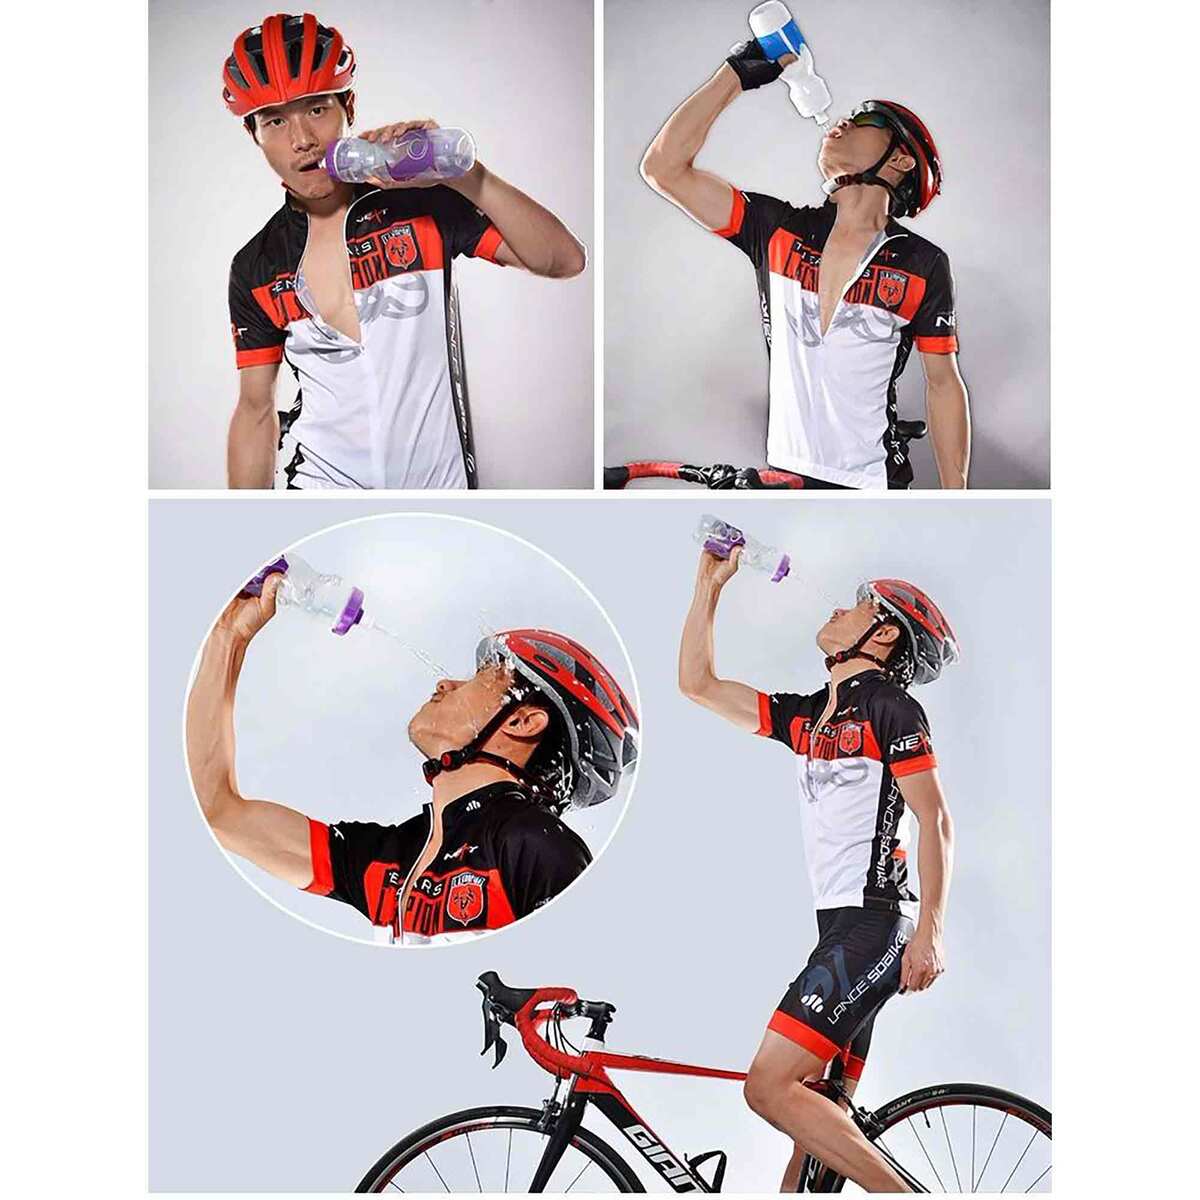 ROCKBROS Cycling Water Bottle 750ml DCBT69T